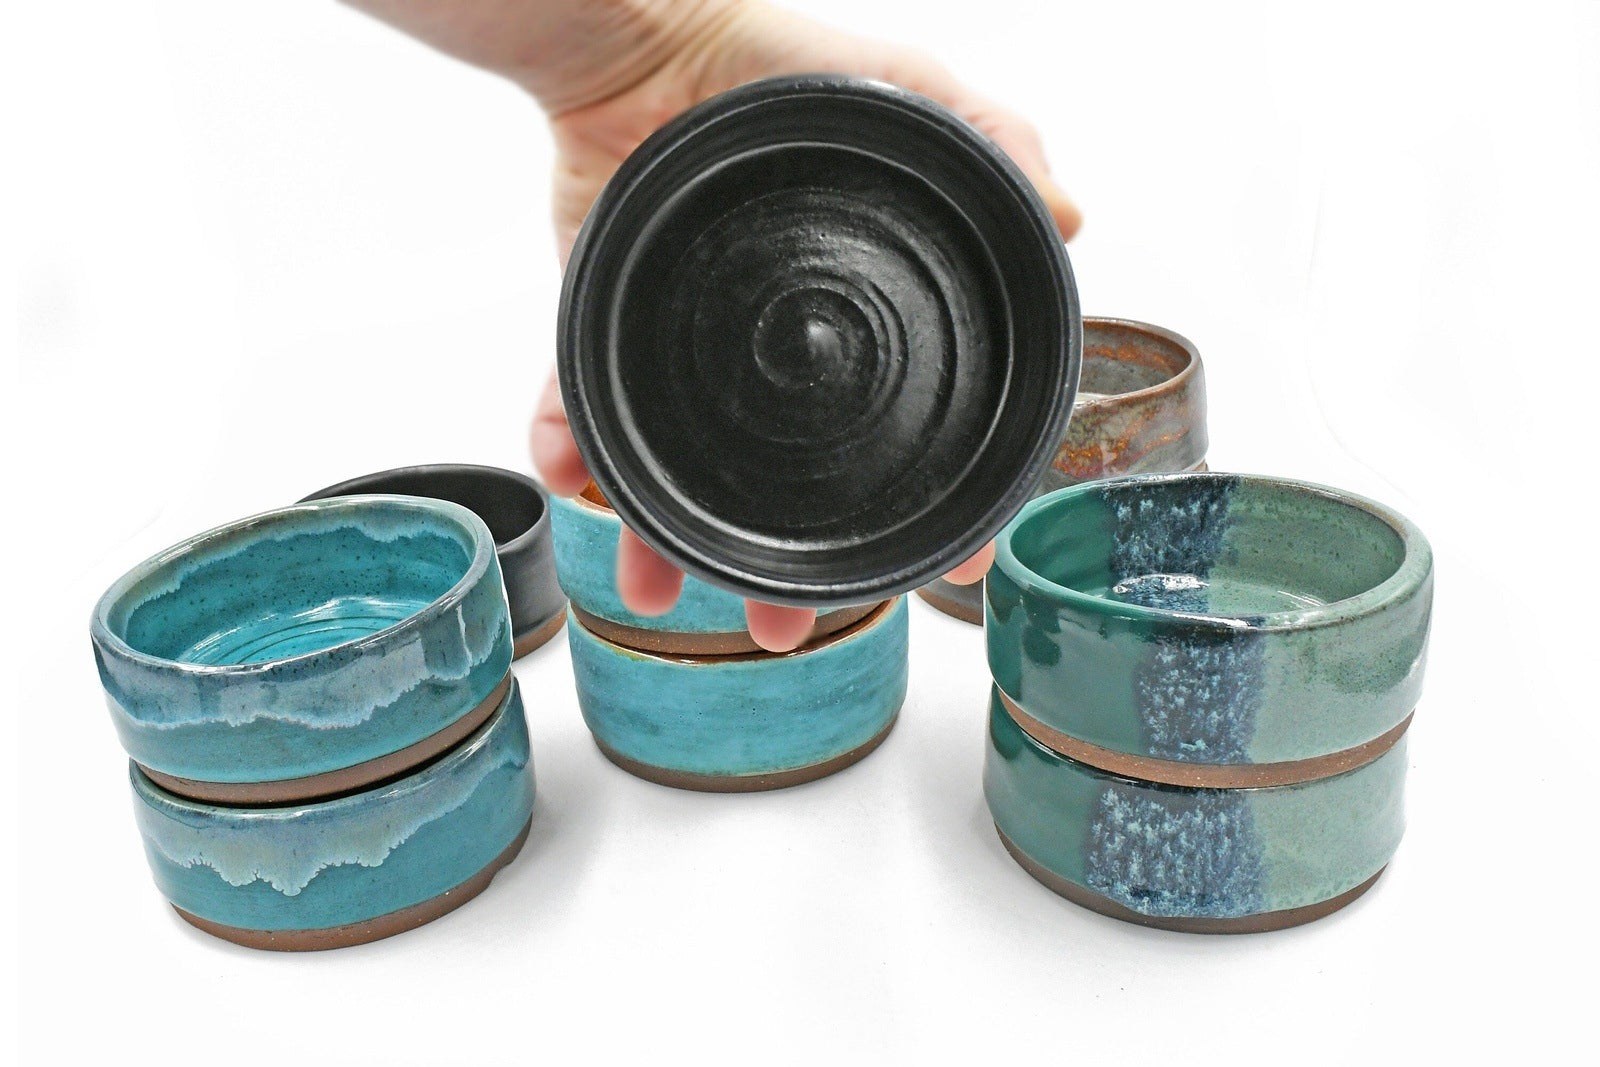 Everyday Small Ceramic Bowl Pair, Black Teal Green, Brown, Handmade Stoneware Pottery, Dip, Snack, Salsa, Queso, Dog Cat Food & Water